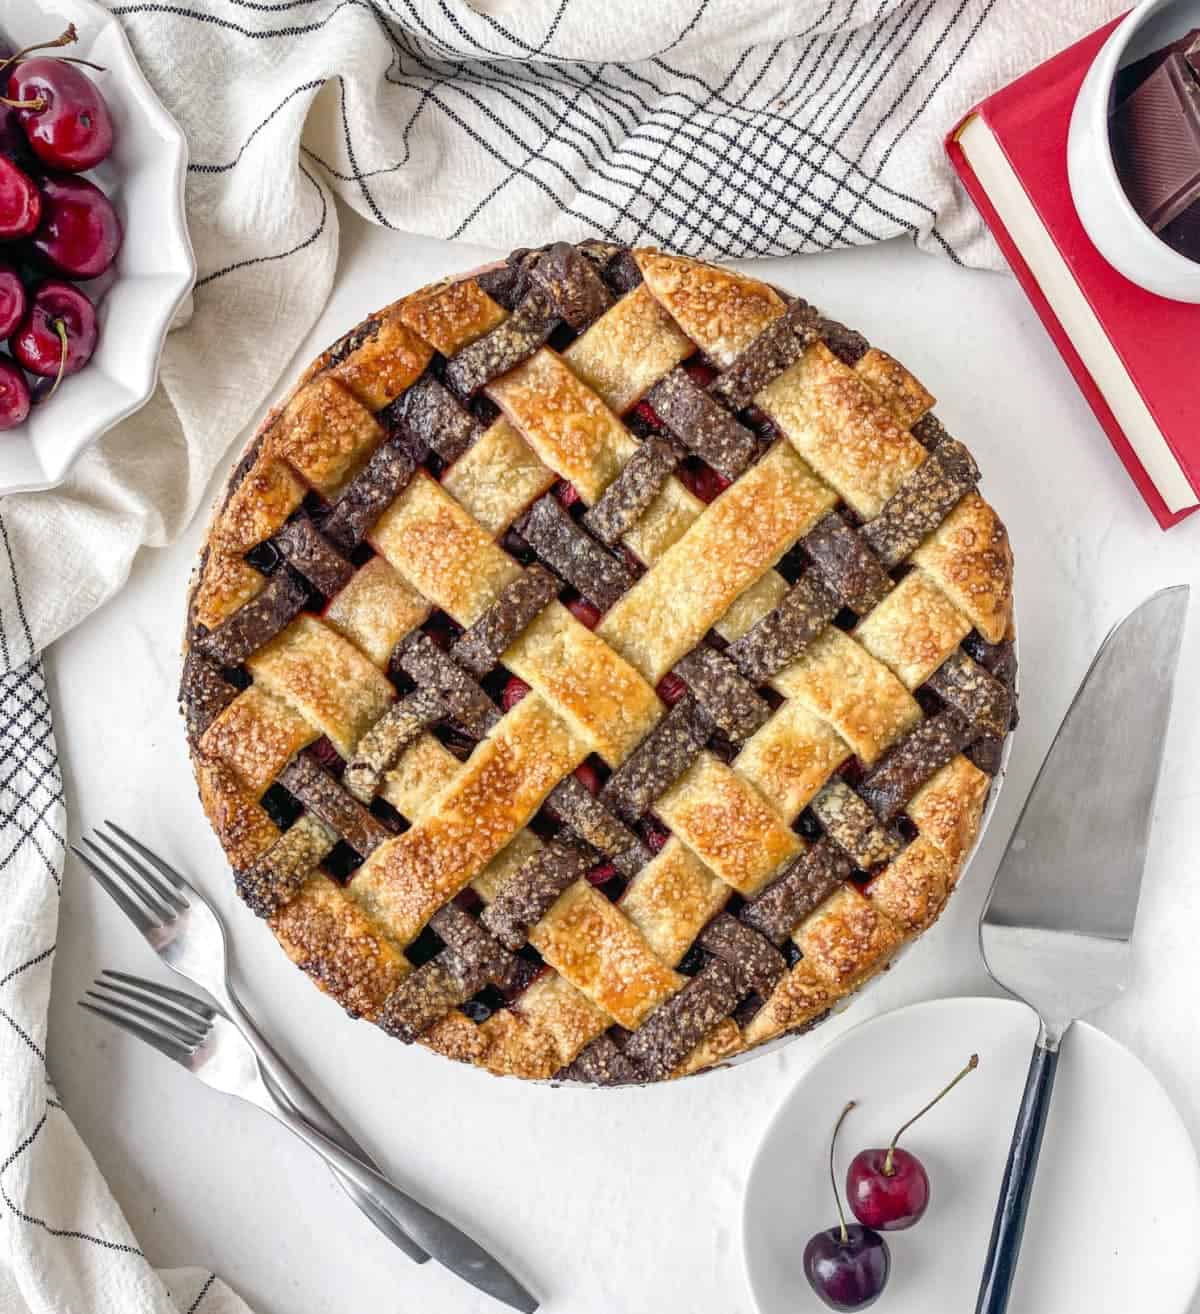 Top view of whole Chocolate Cherry Pie with two-tone lattice top.